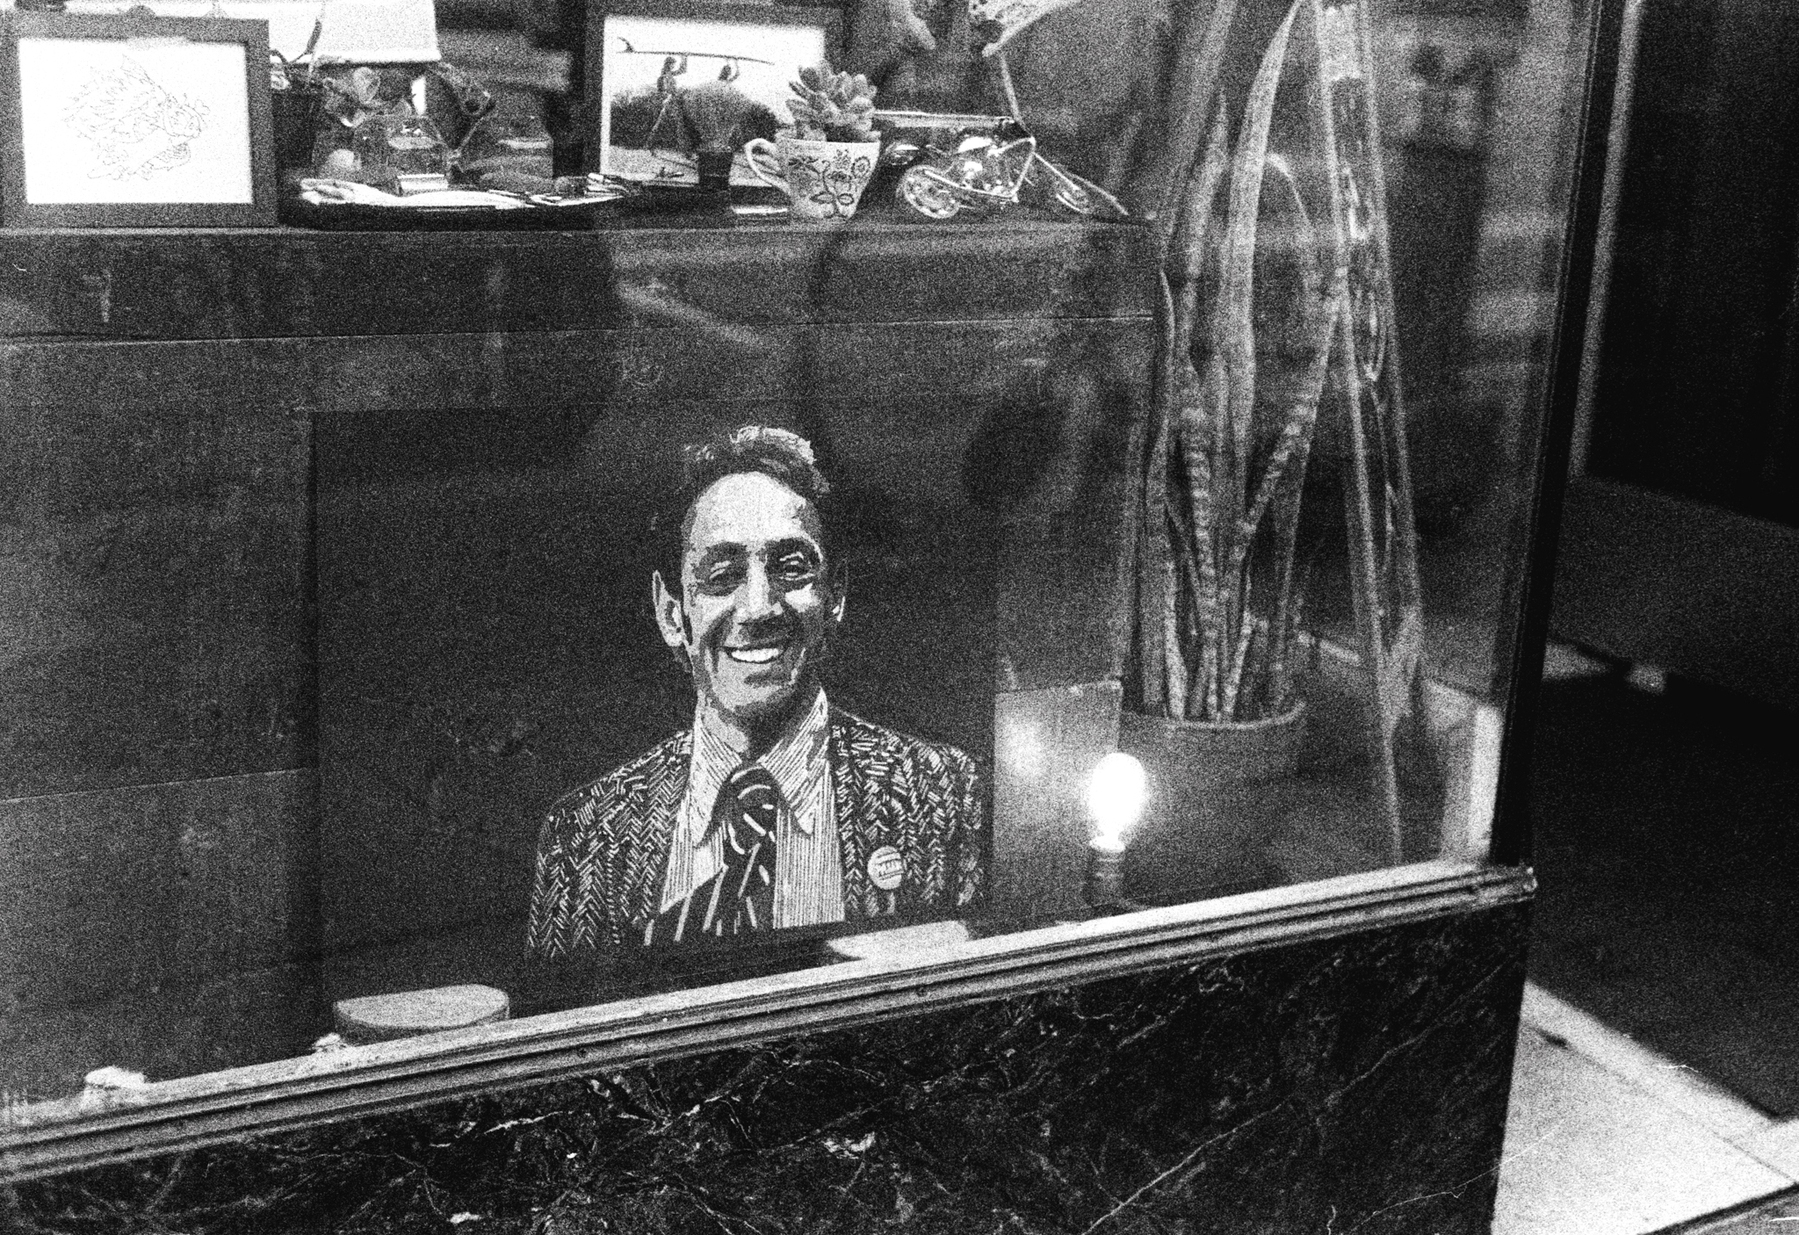 a scan of a black and white photo showing artwork featuring Harvey Milk the former gay politician of San Francisco who was assassinated a few decades ago. It sits in the window of a barber shop